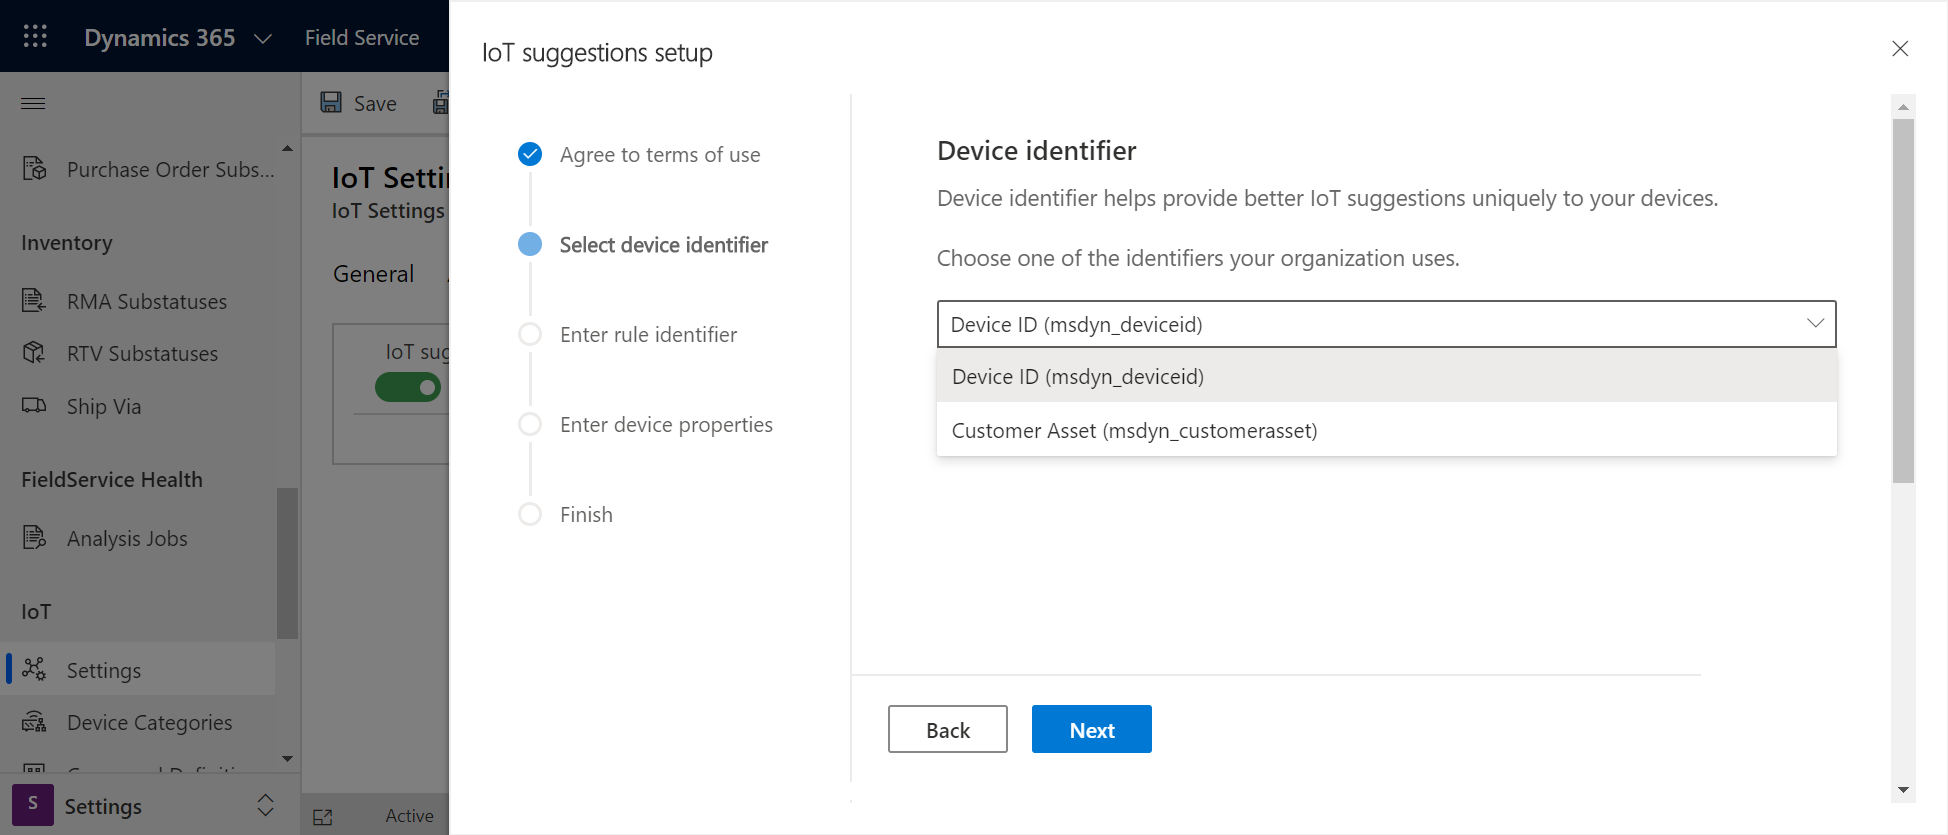 Screenshot of the IoT suggestions setup screen, showing the device identifier section.